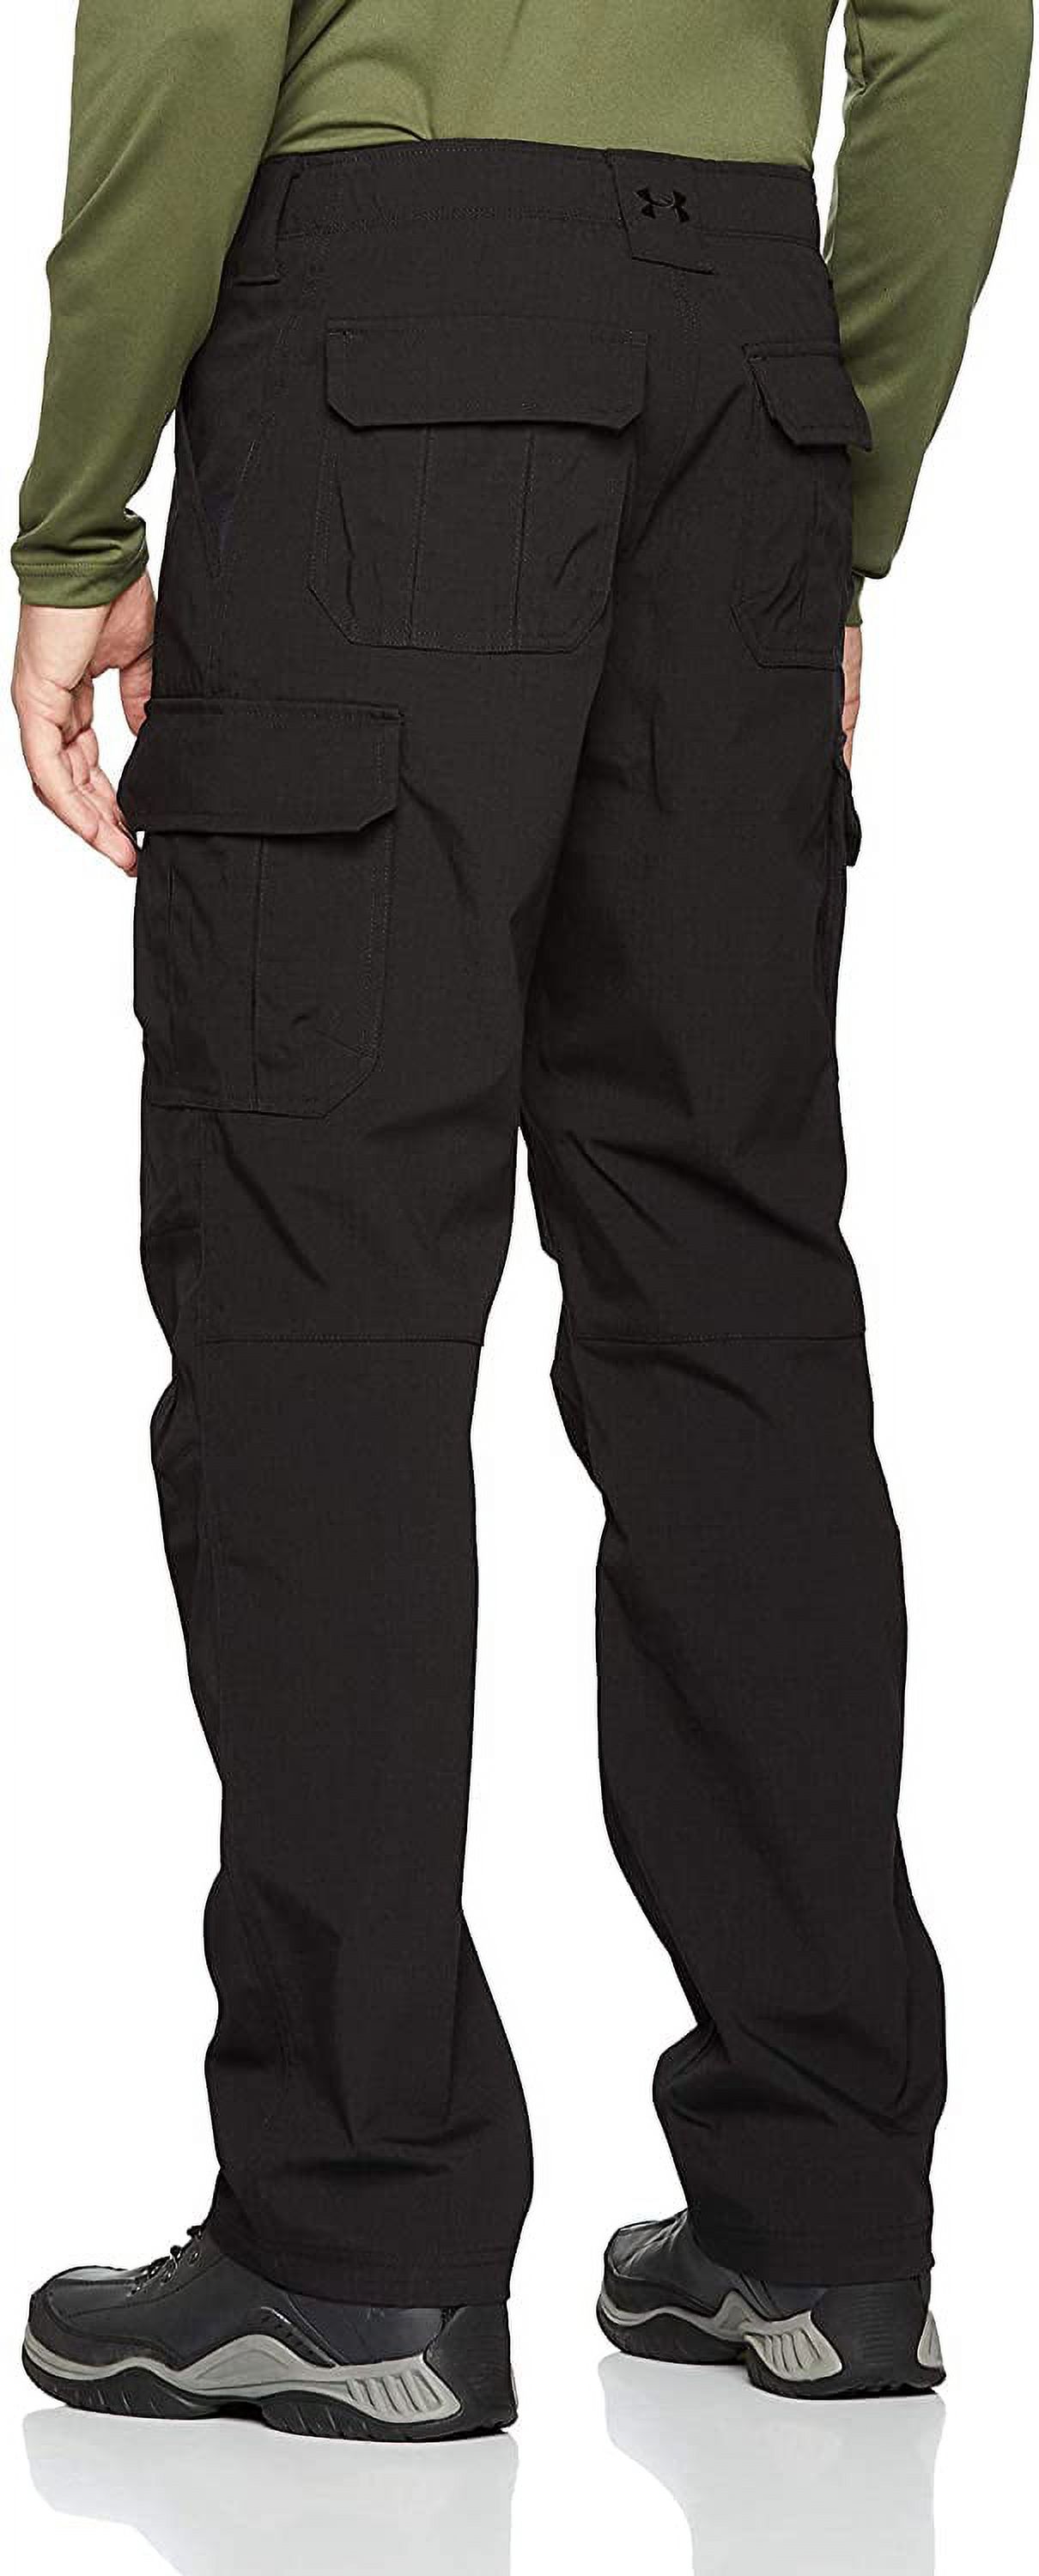 UNDER ARMOUR UA Tactical Patrol Pants - Ultimate Black - Size 30 x 30 - image 2 of 7